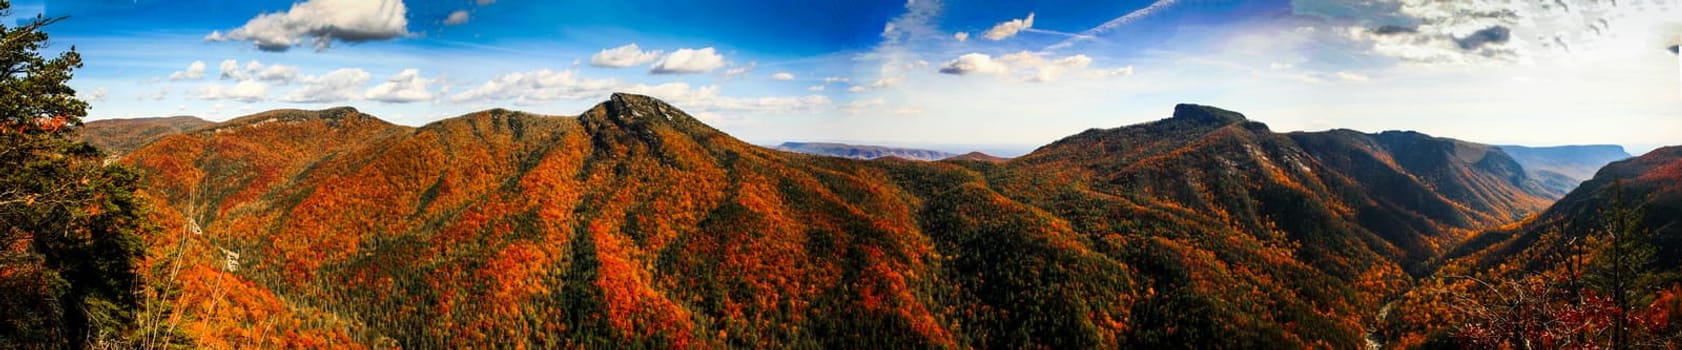 View of Linville Gorge in Autumn, North Carolina